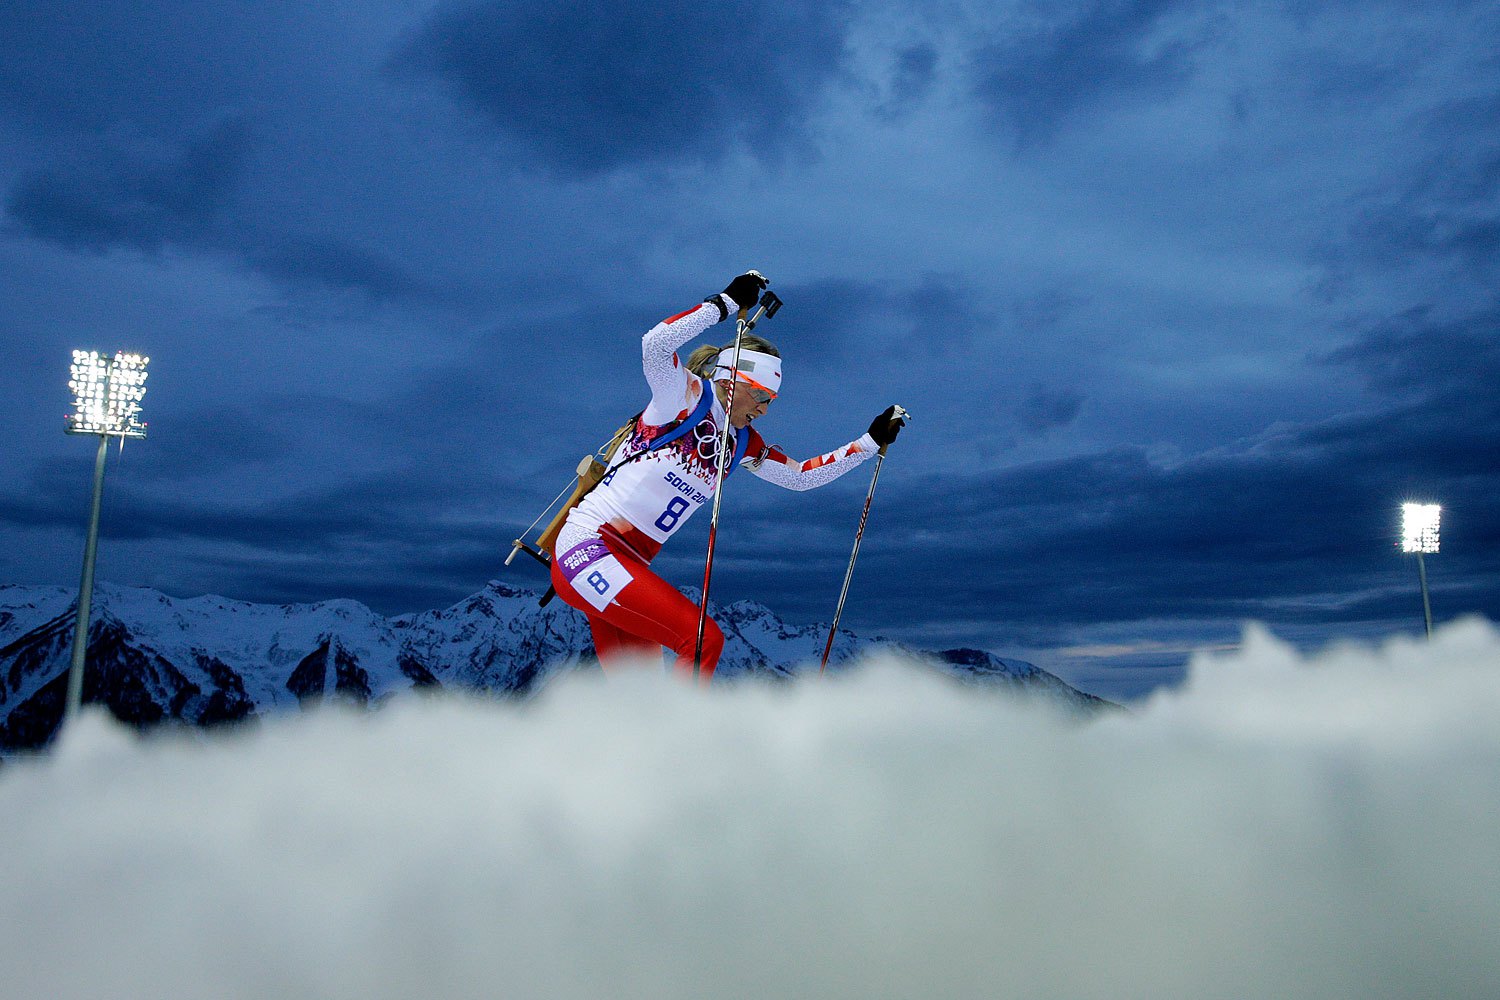 Skiers compete in the Men's Skiathlon 15 km Classic + 15 km Free during day two of the Sochi 2014 Winter Olympics at Laura Cross-country Ski &amp; Biathlon Center on Feb. 9 2014.